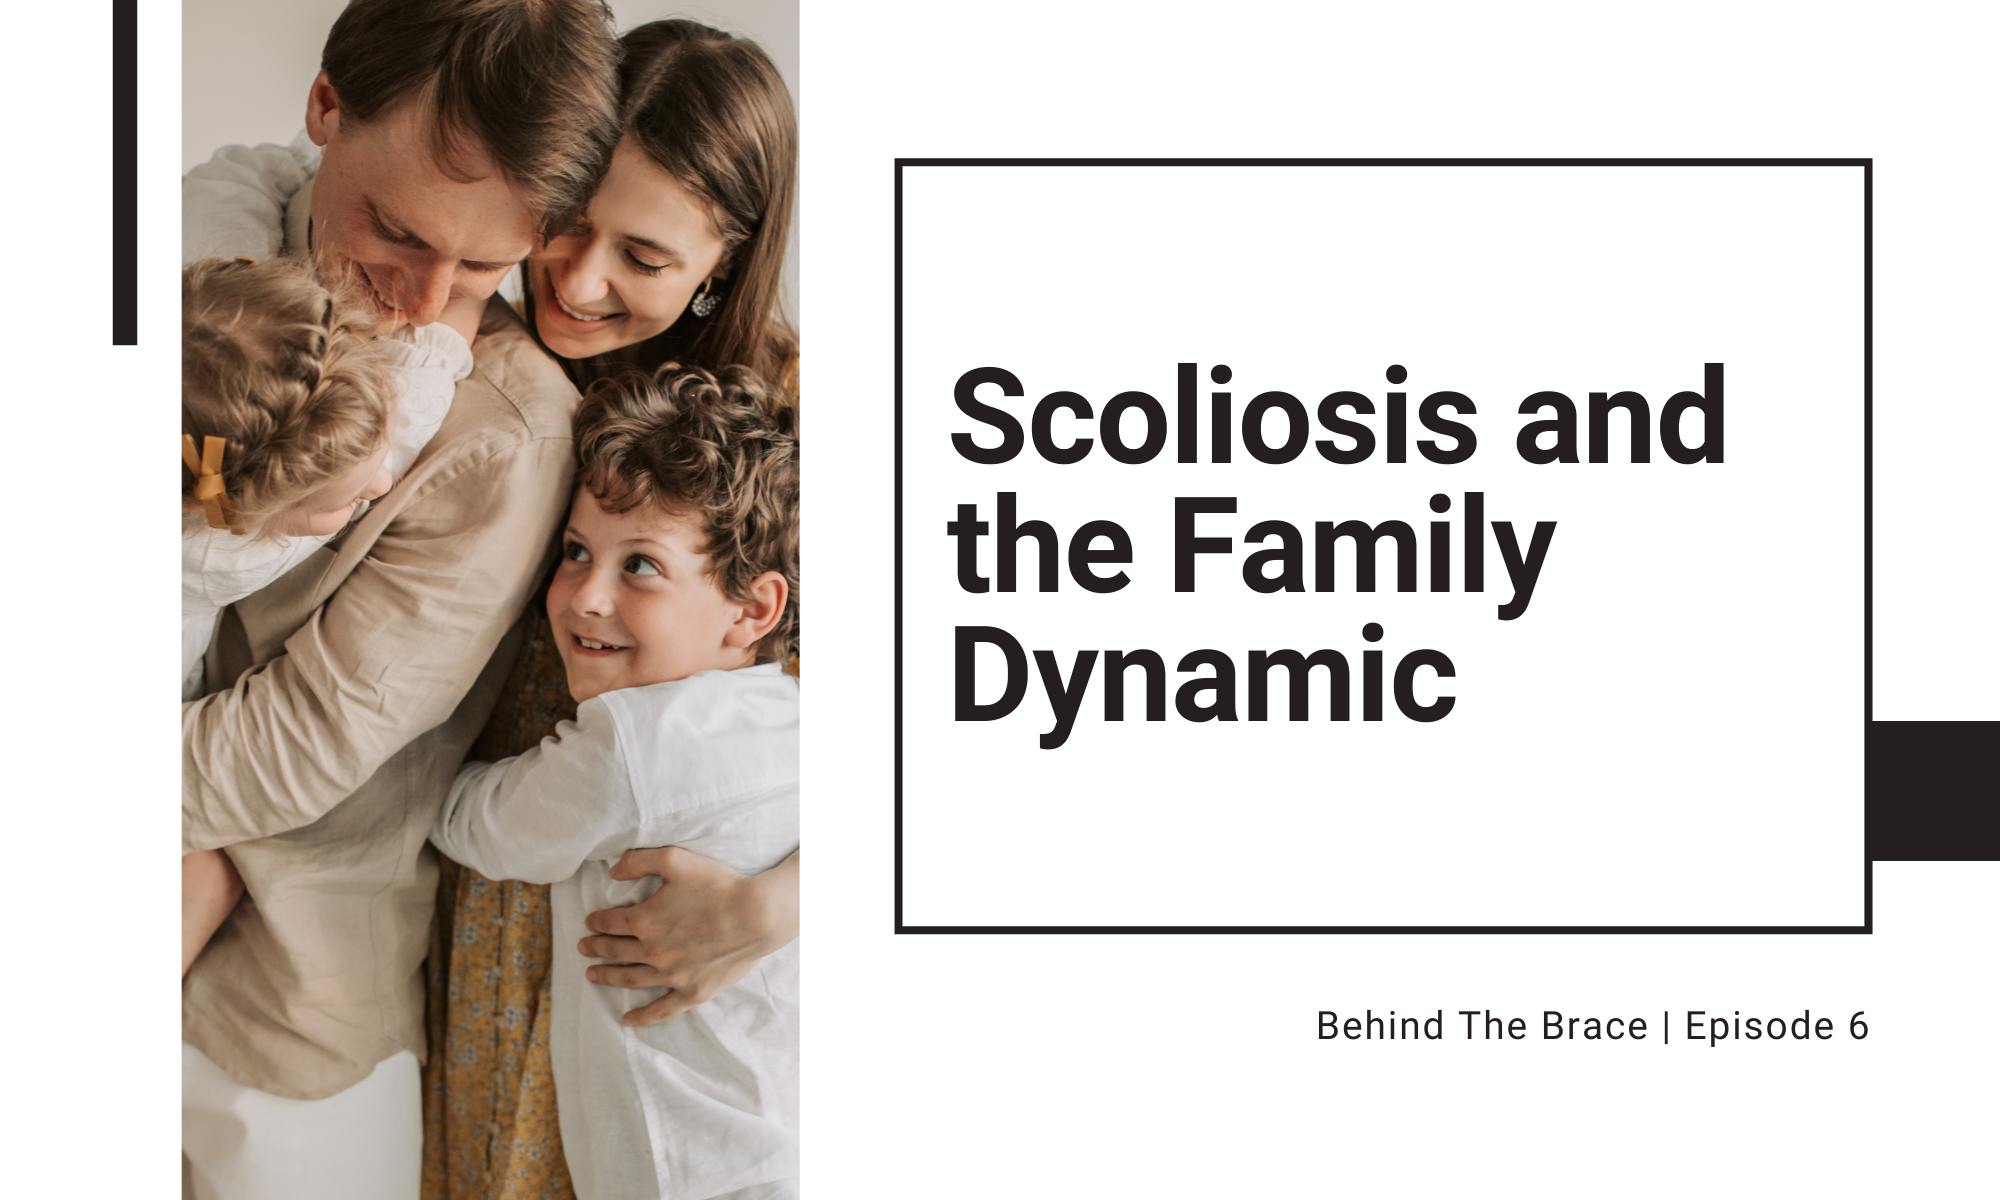 Scoliosis and the Family Dynamic